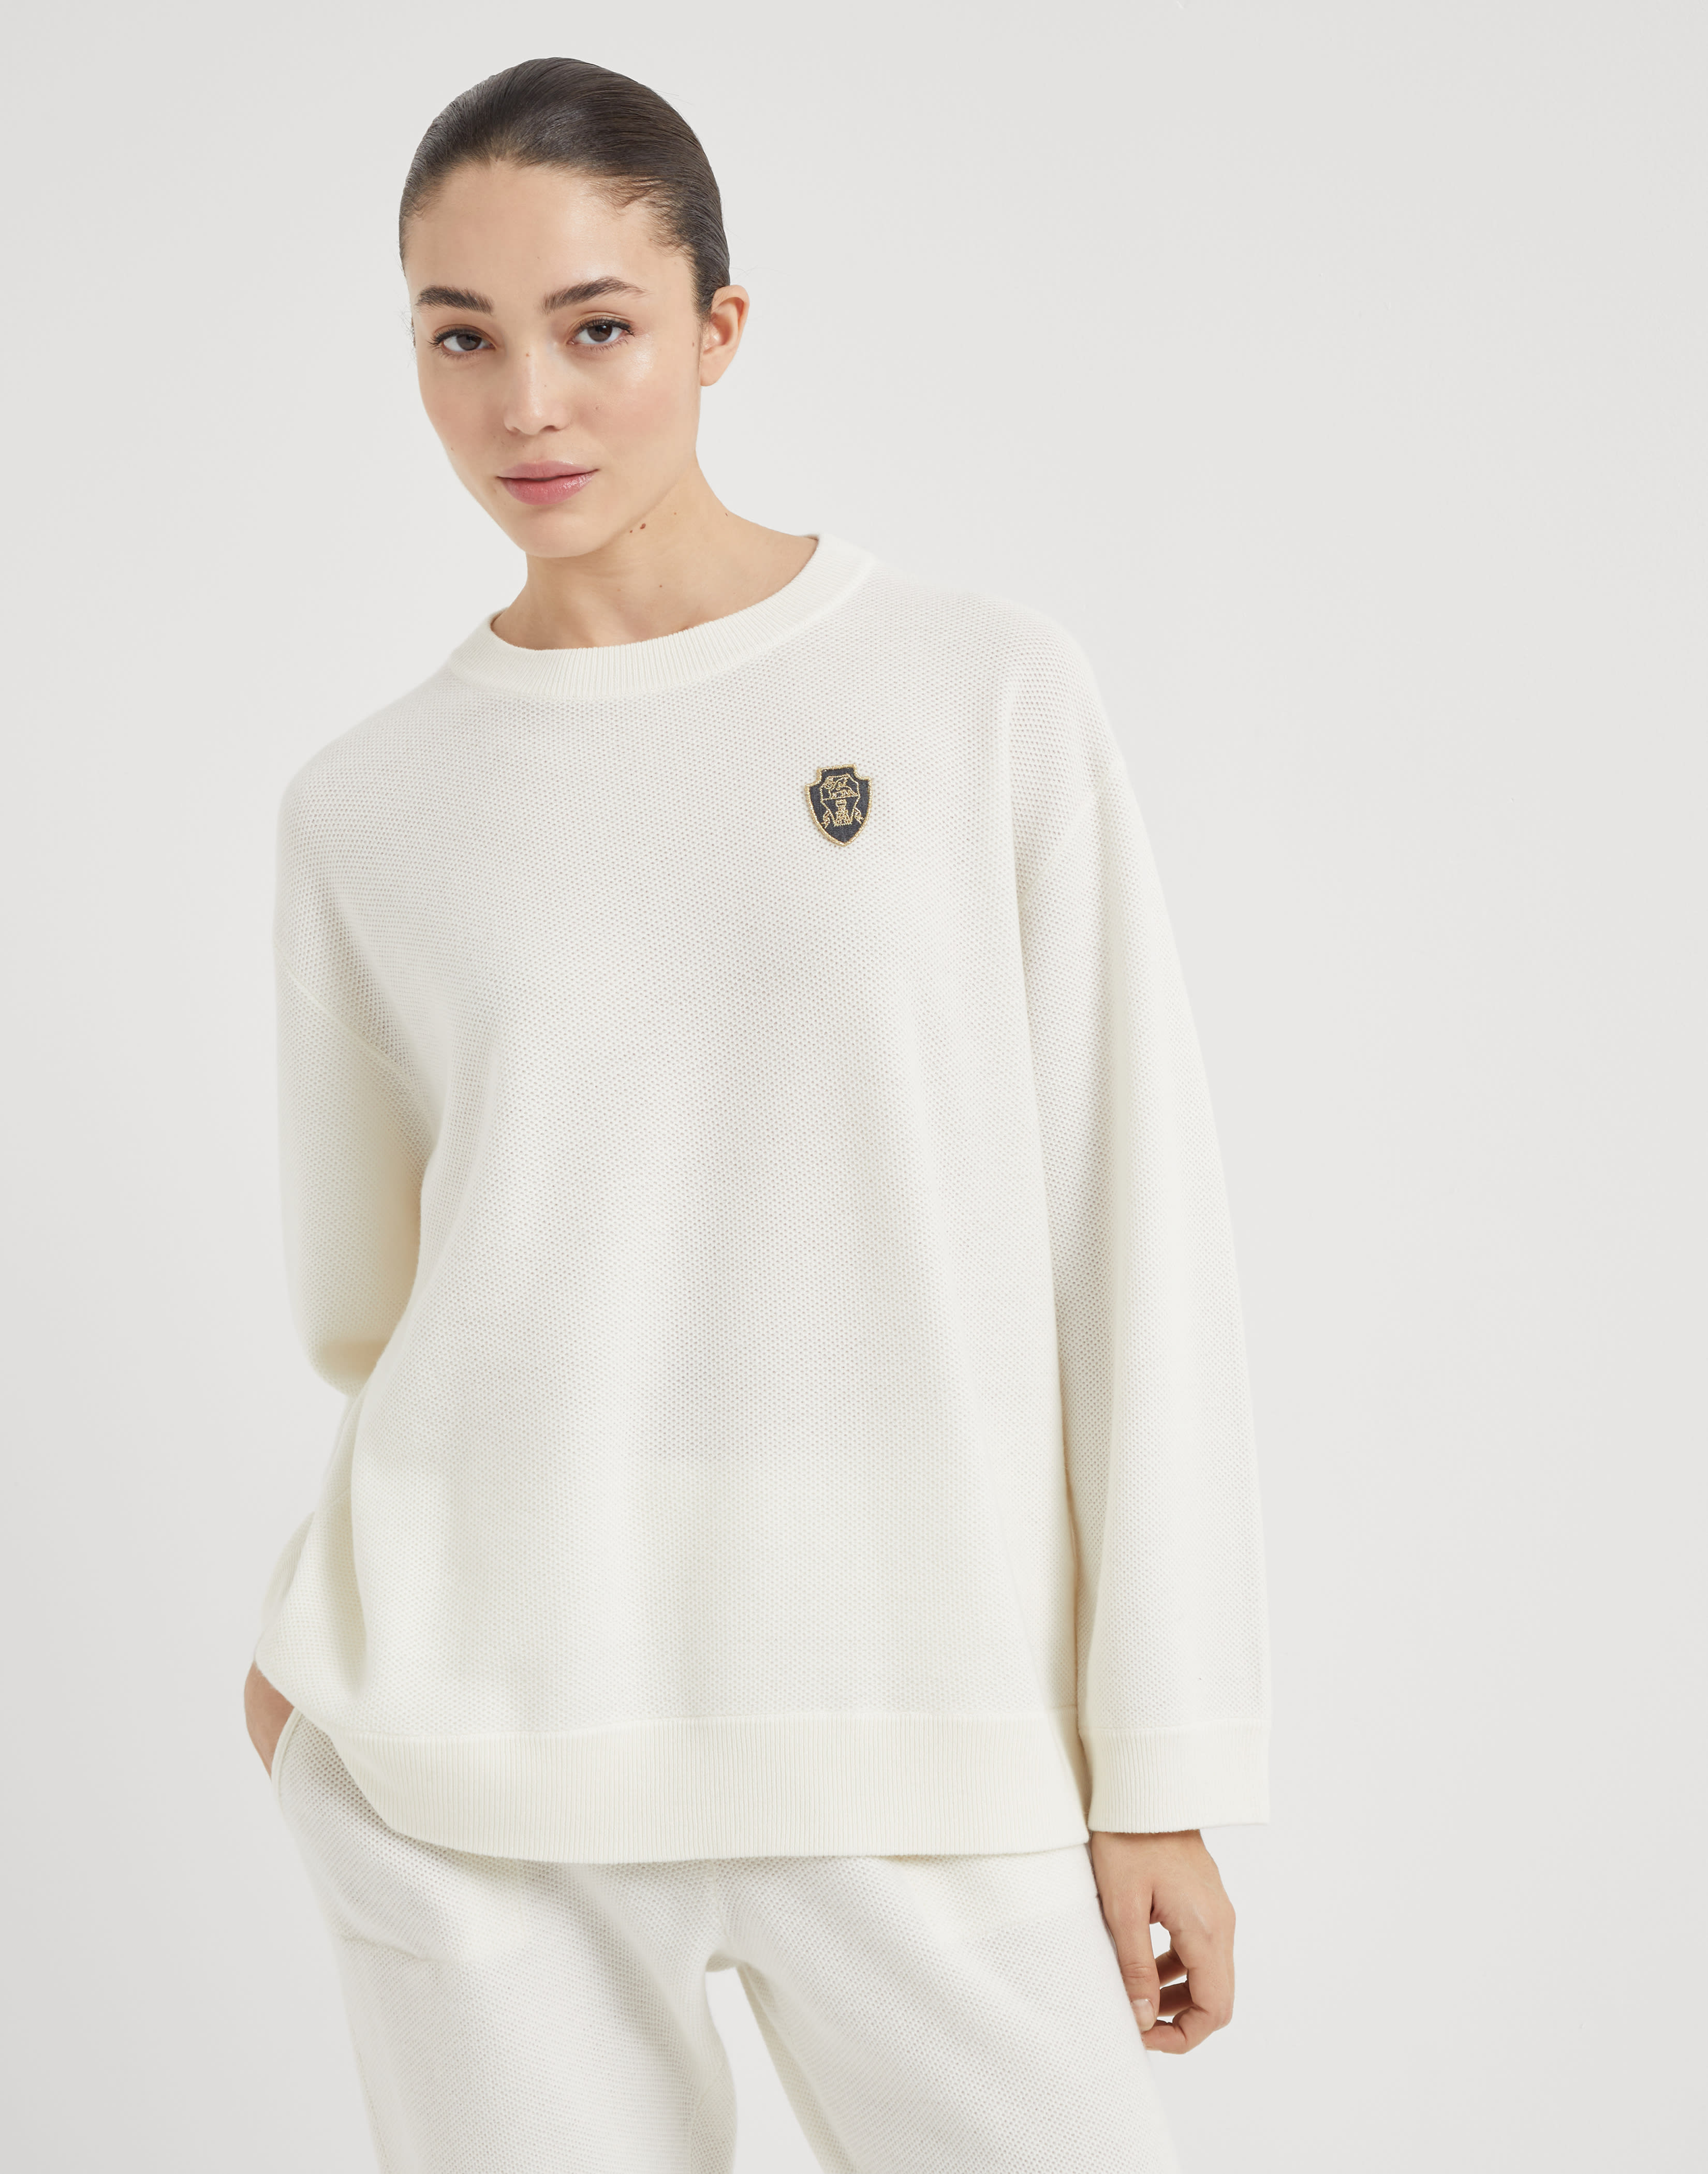 Honeycomb knit sweater with logo